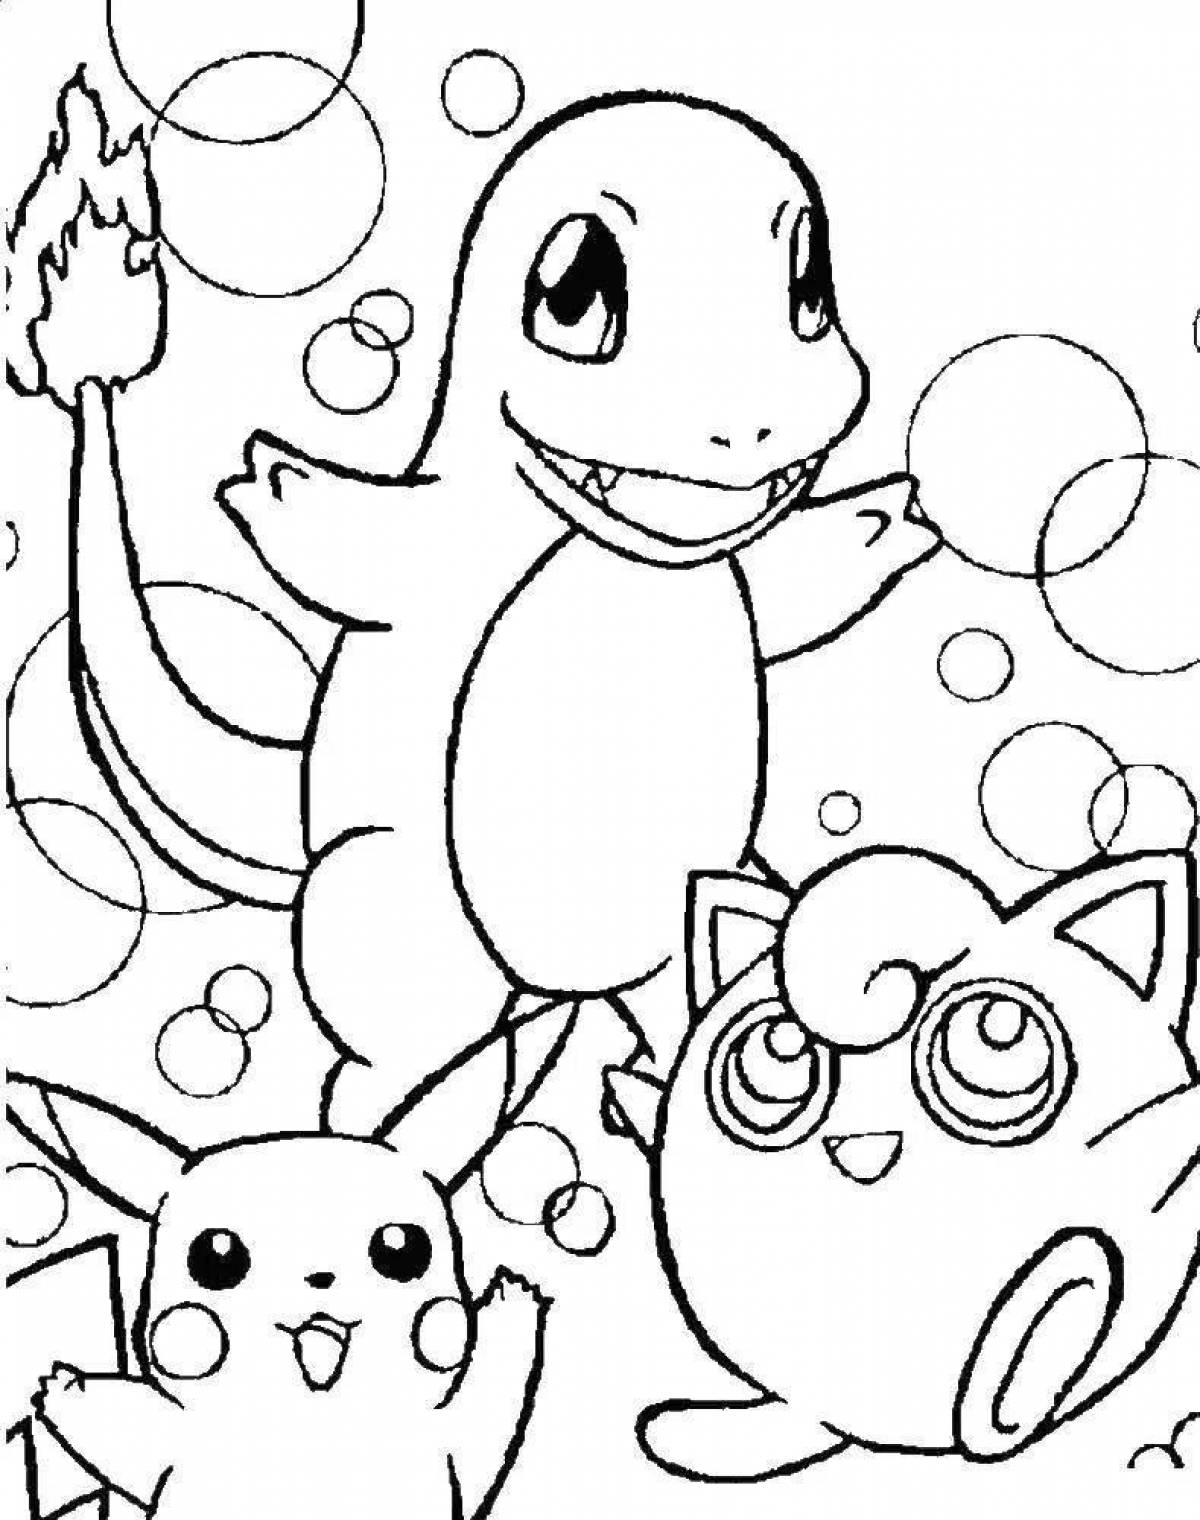 Colorful pokemon coloring book for kids